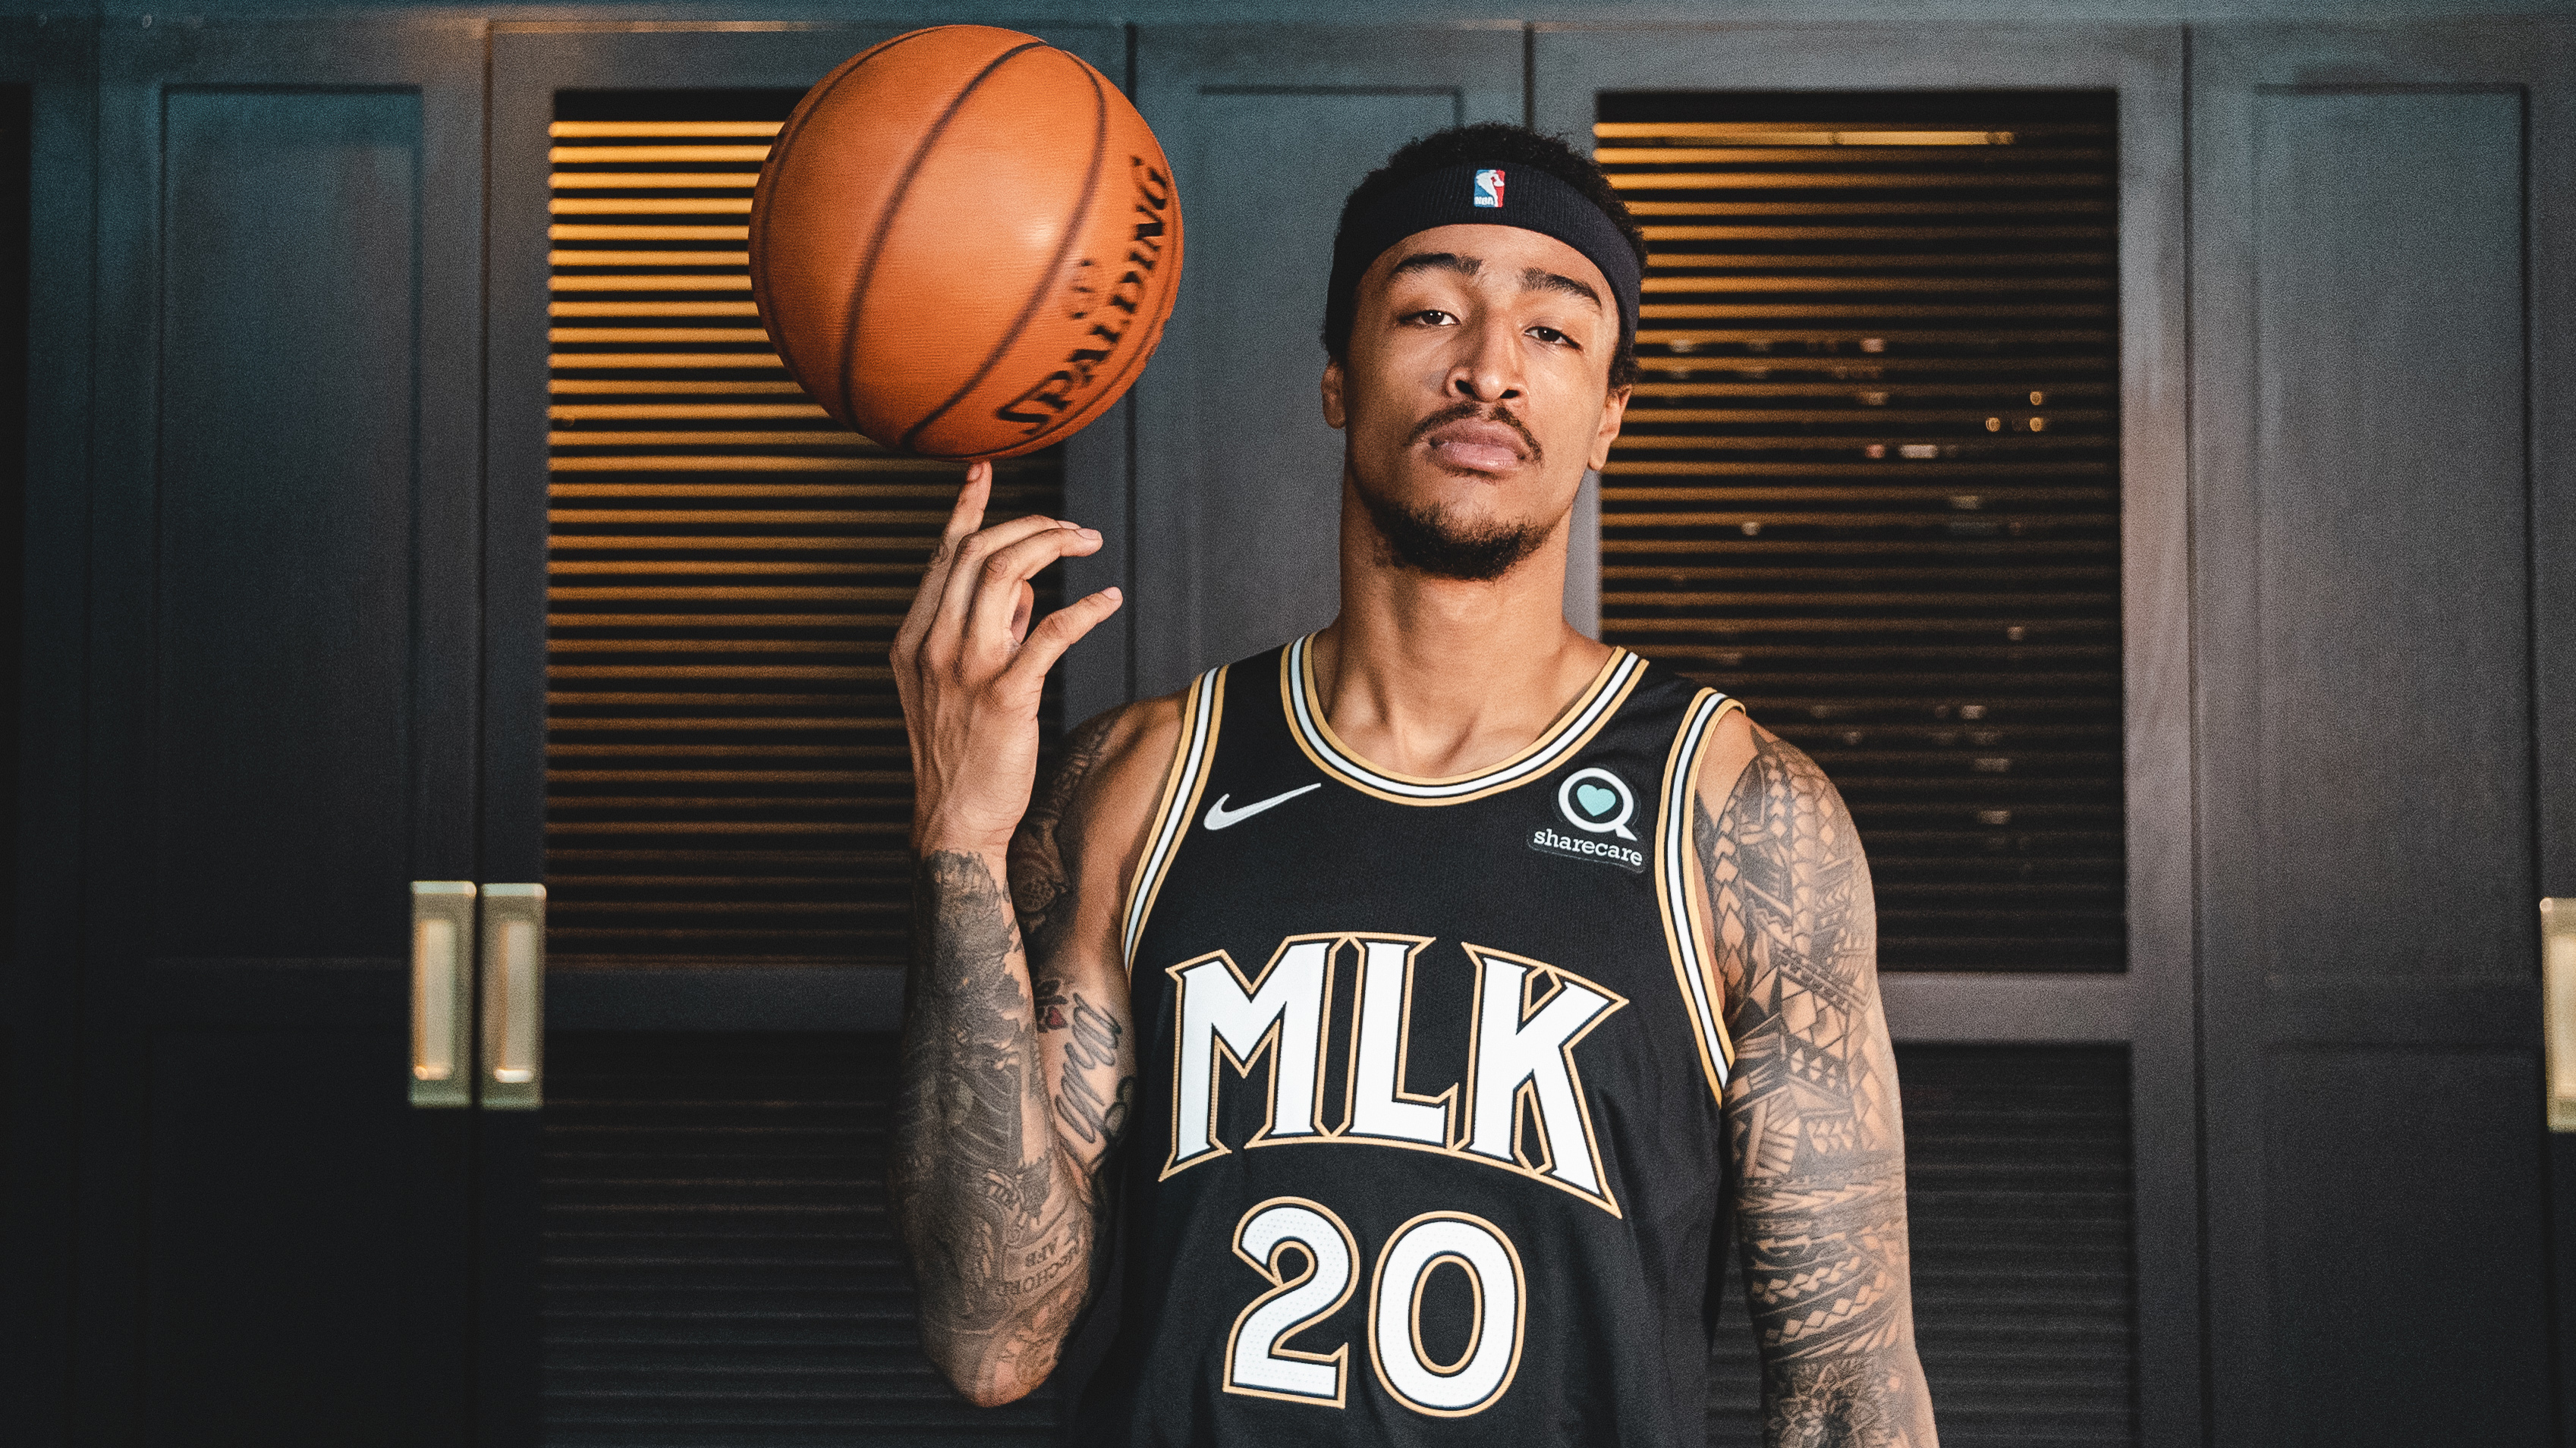 Hawks unveil new City Edition uniforms that honor Martin Luther King Jr. 